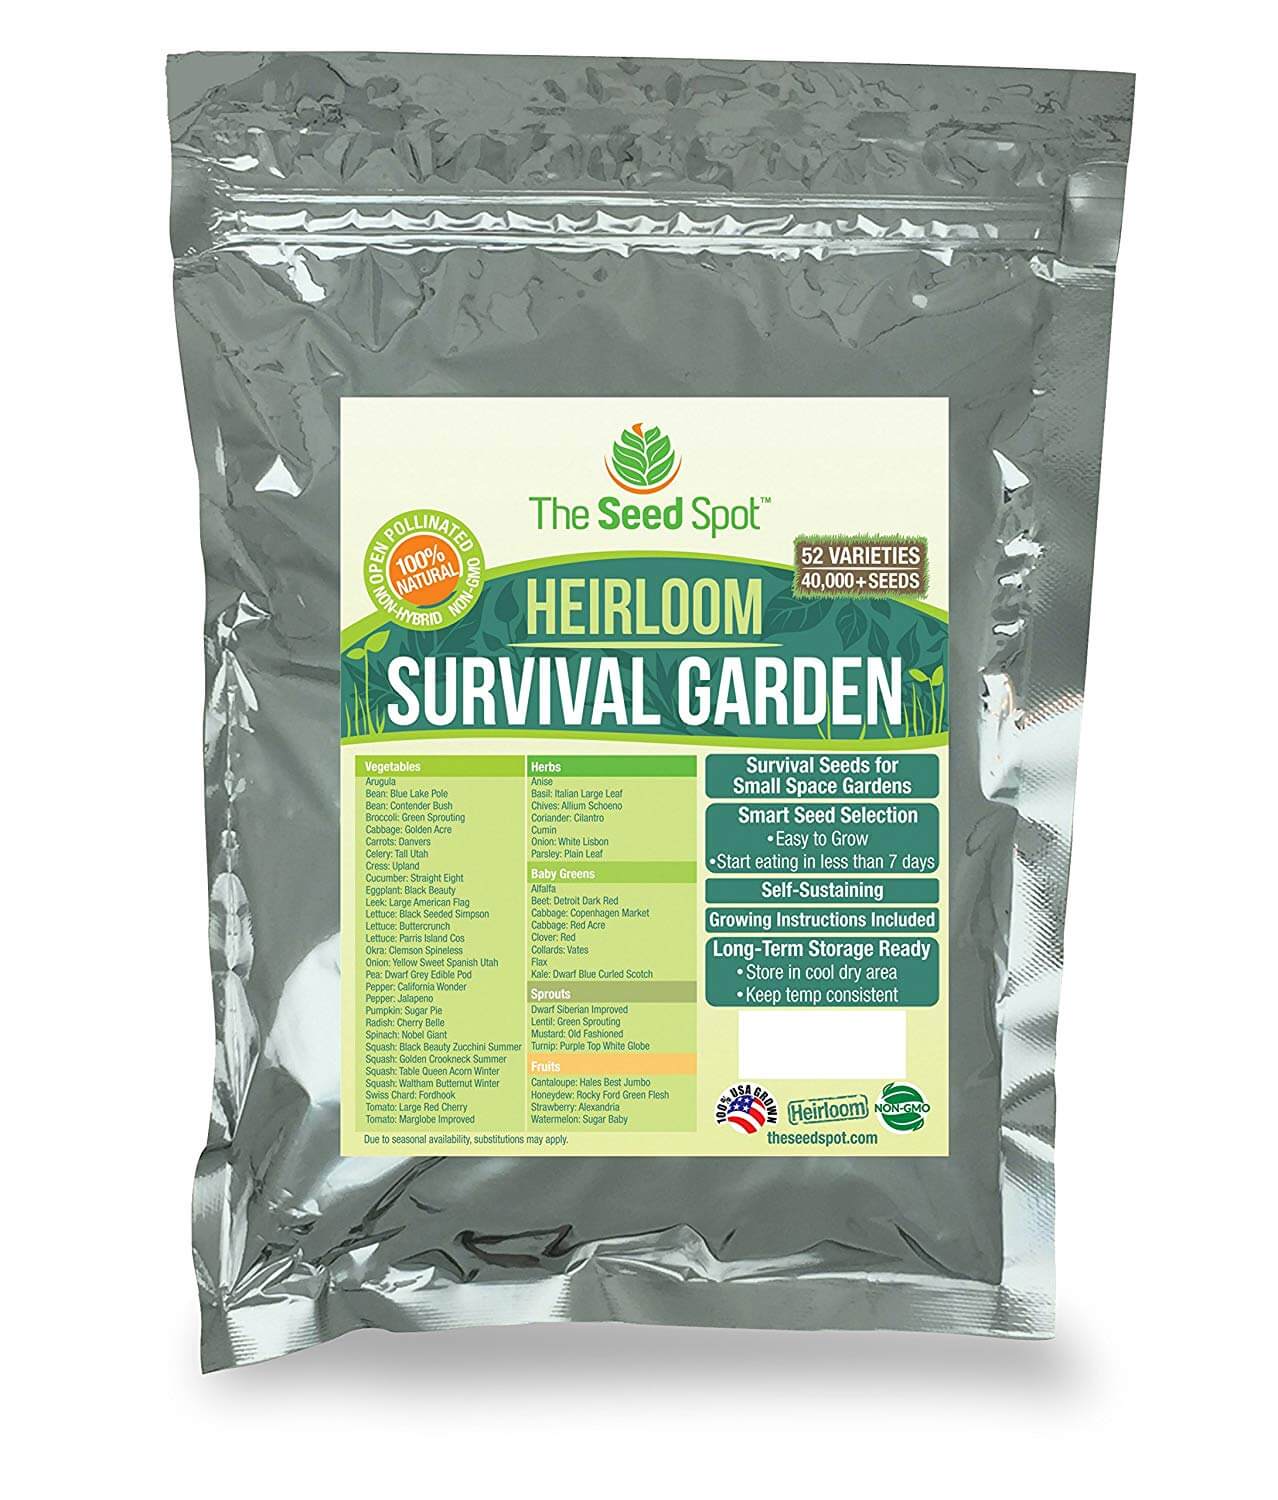 All Seeds are Heirloom Set of 30 Pack Vegetable Seeds 30 Varieties 100% Non-GMO Create a Deluxe Garden by Black Duck Brand 30 Different Varieties 